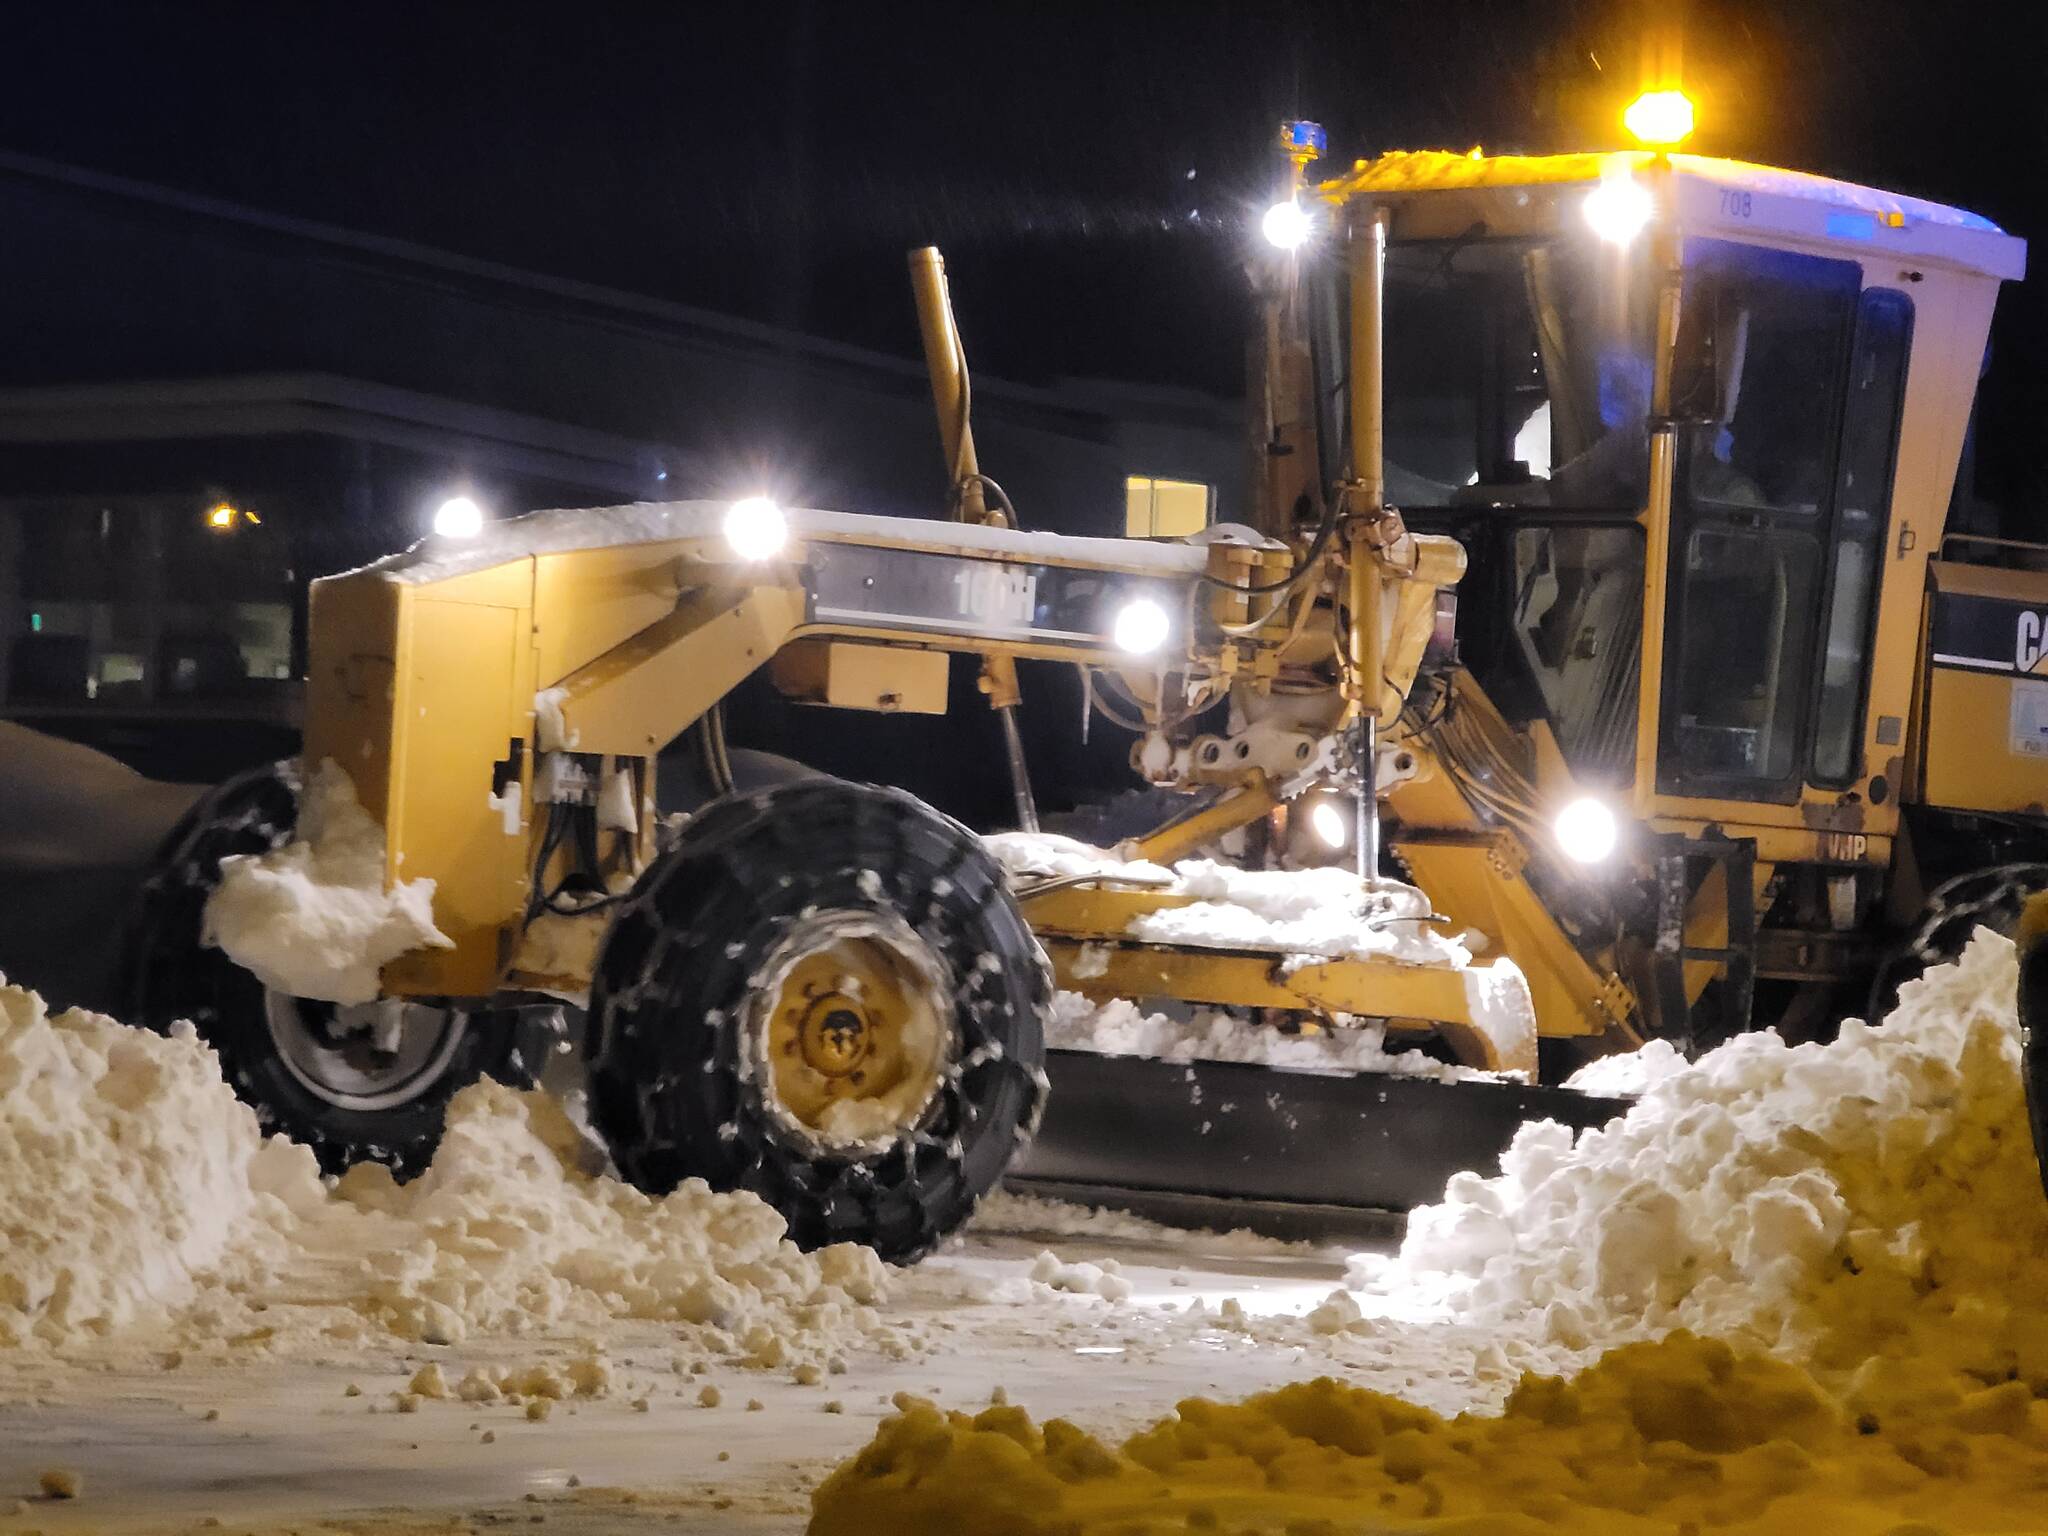 Ben Hohenstatt / Juneau Empire
A city-owned grader moves snow before dawn on Feb. 4 on Tongass Boulevard in the Mendenhall Valley. City snow removal crews have been challenged by multiple winter storms and higher-than-average snowfall.